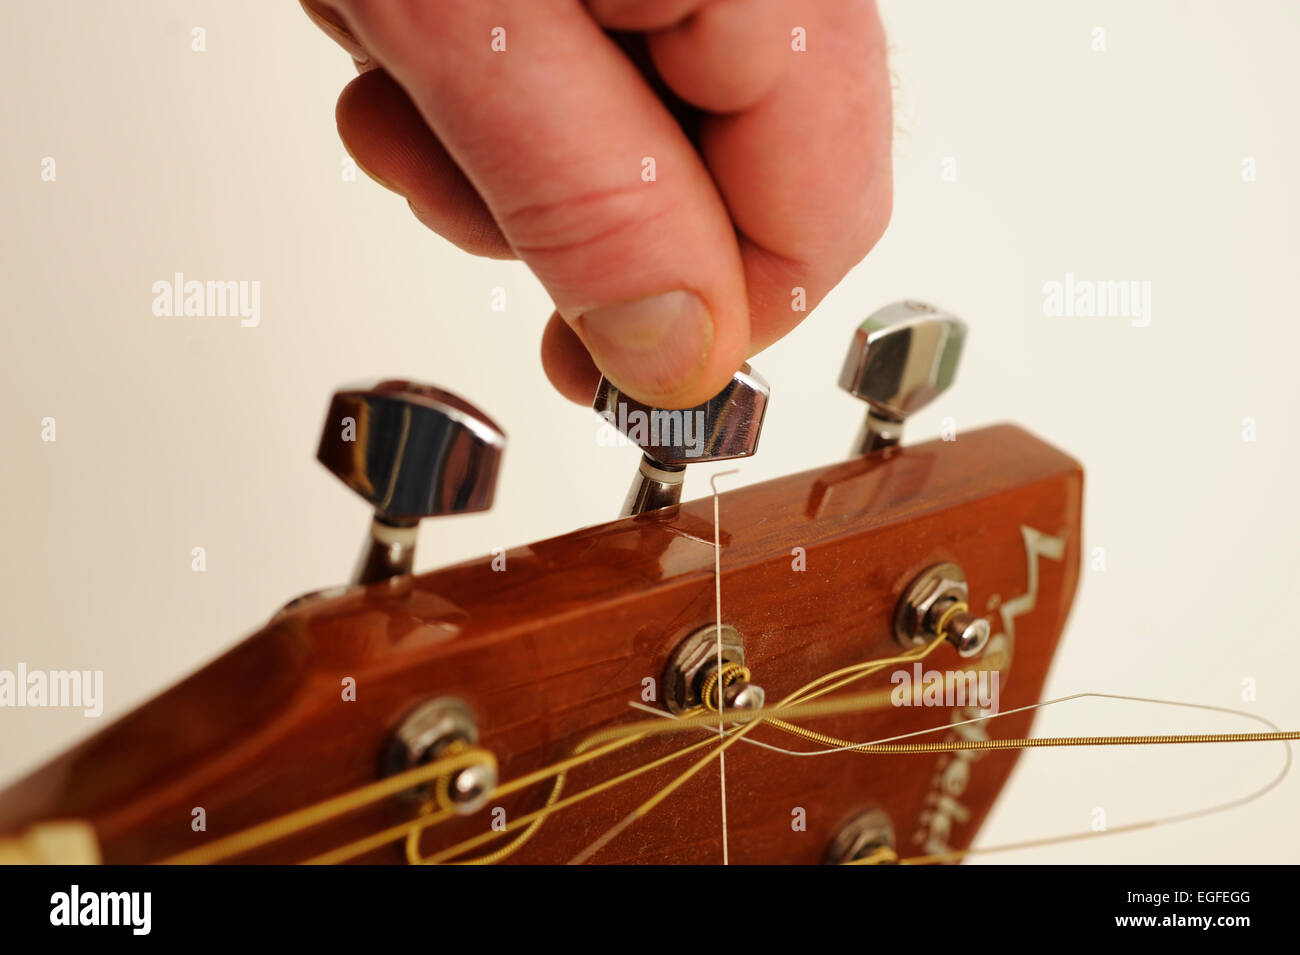 Male Hand Tunning an Acoustic Guitar Stock Photo